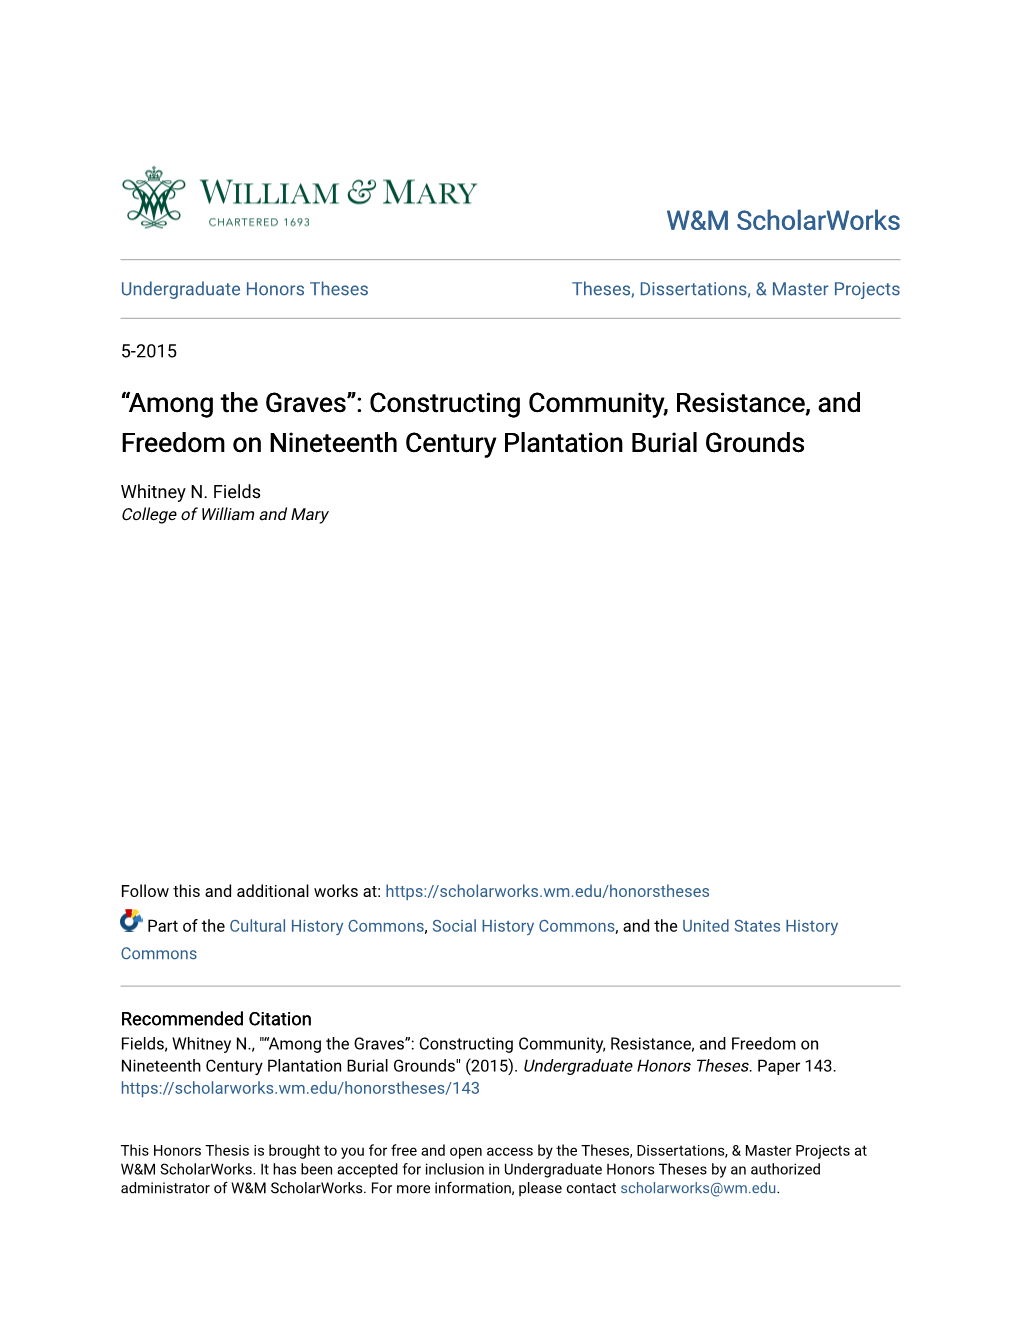 Constructing Community, Resistance, and Freedom on Nineteenth Century Plantation Burial Grounds